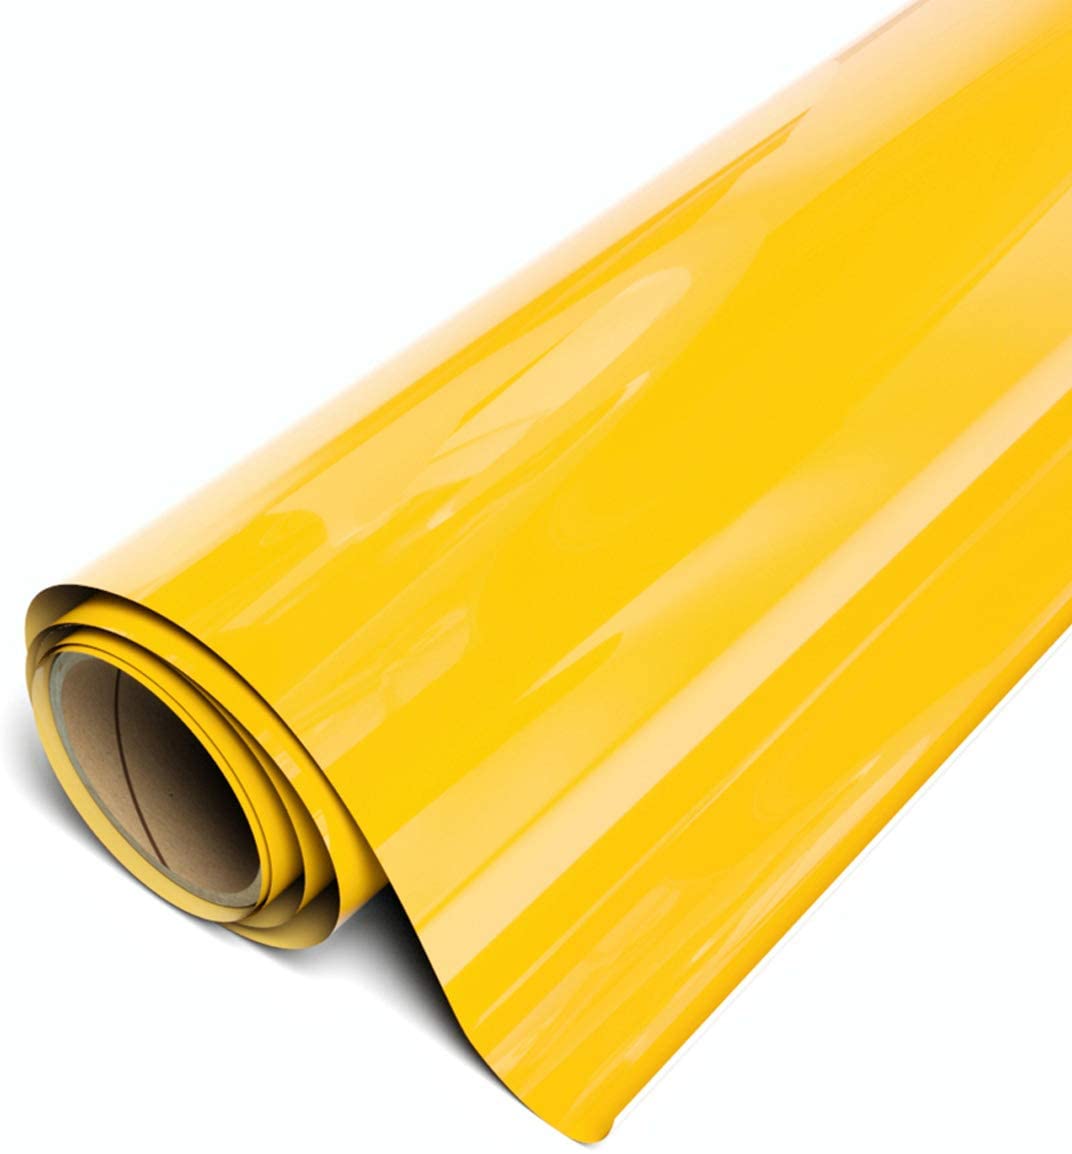 Siser EasyWeed Stretch Roll - 12 wide HTV